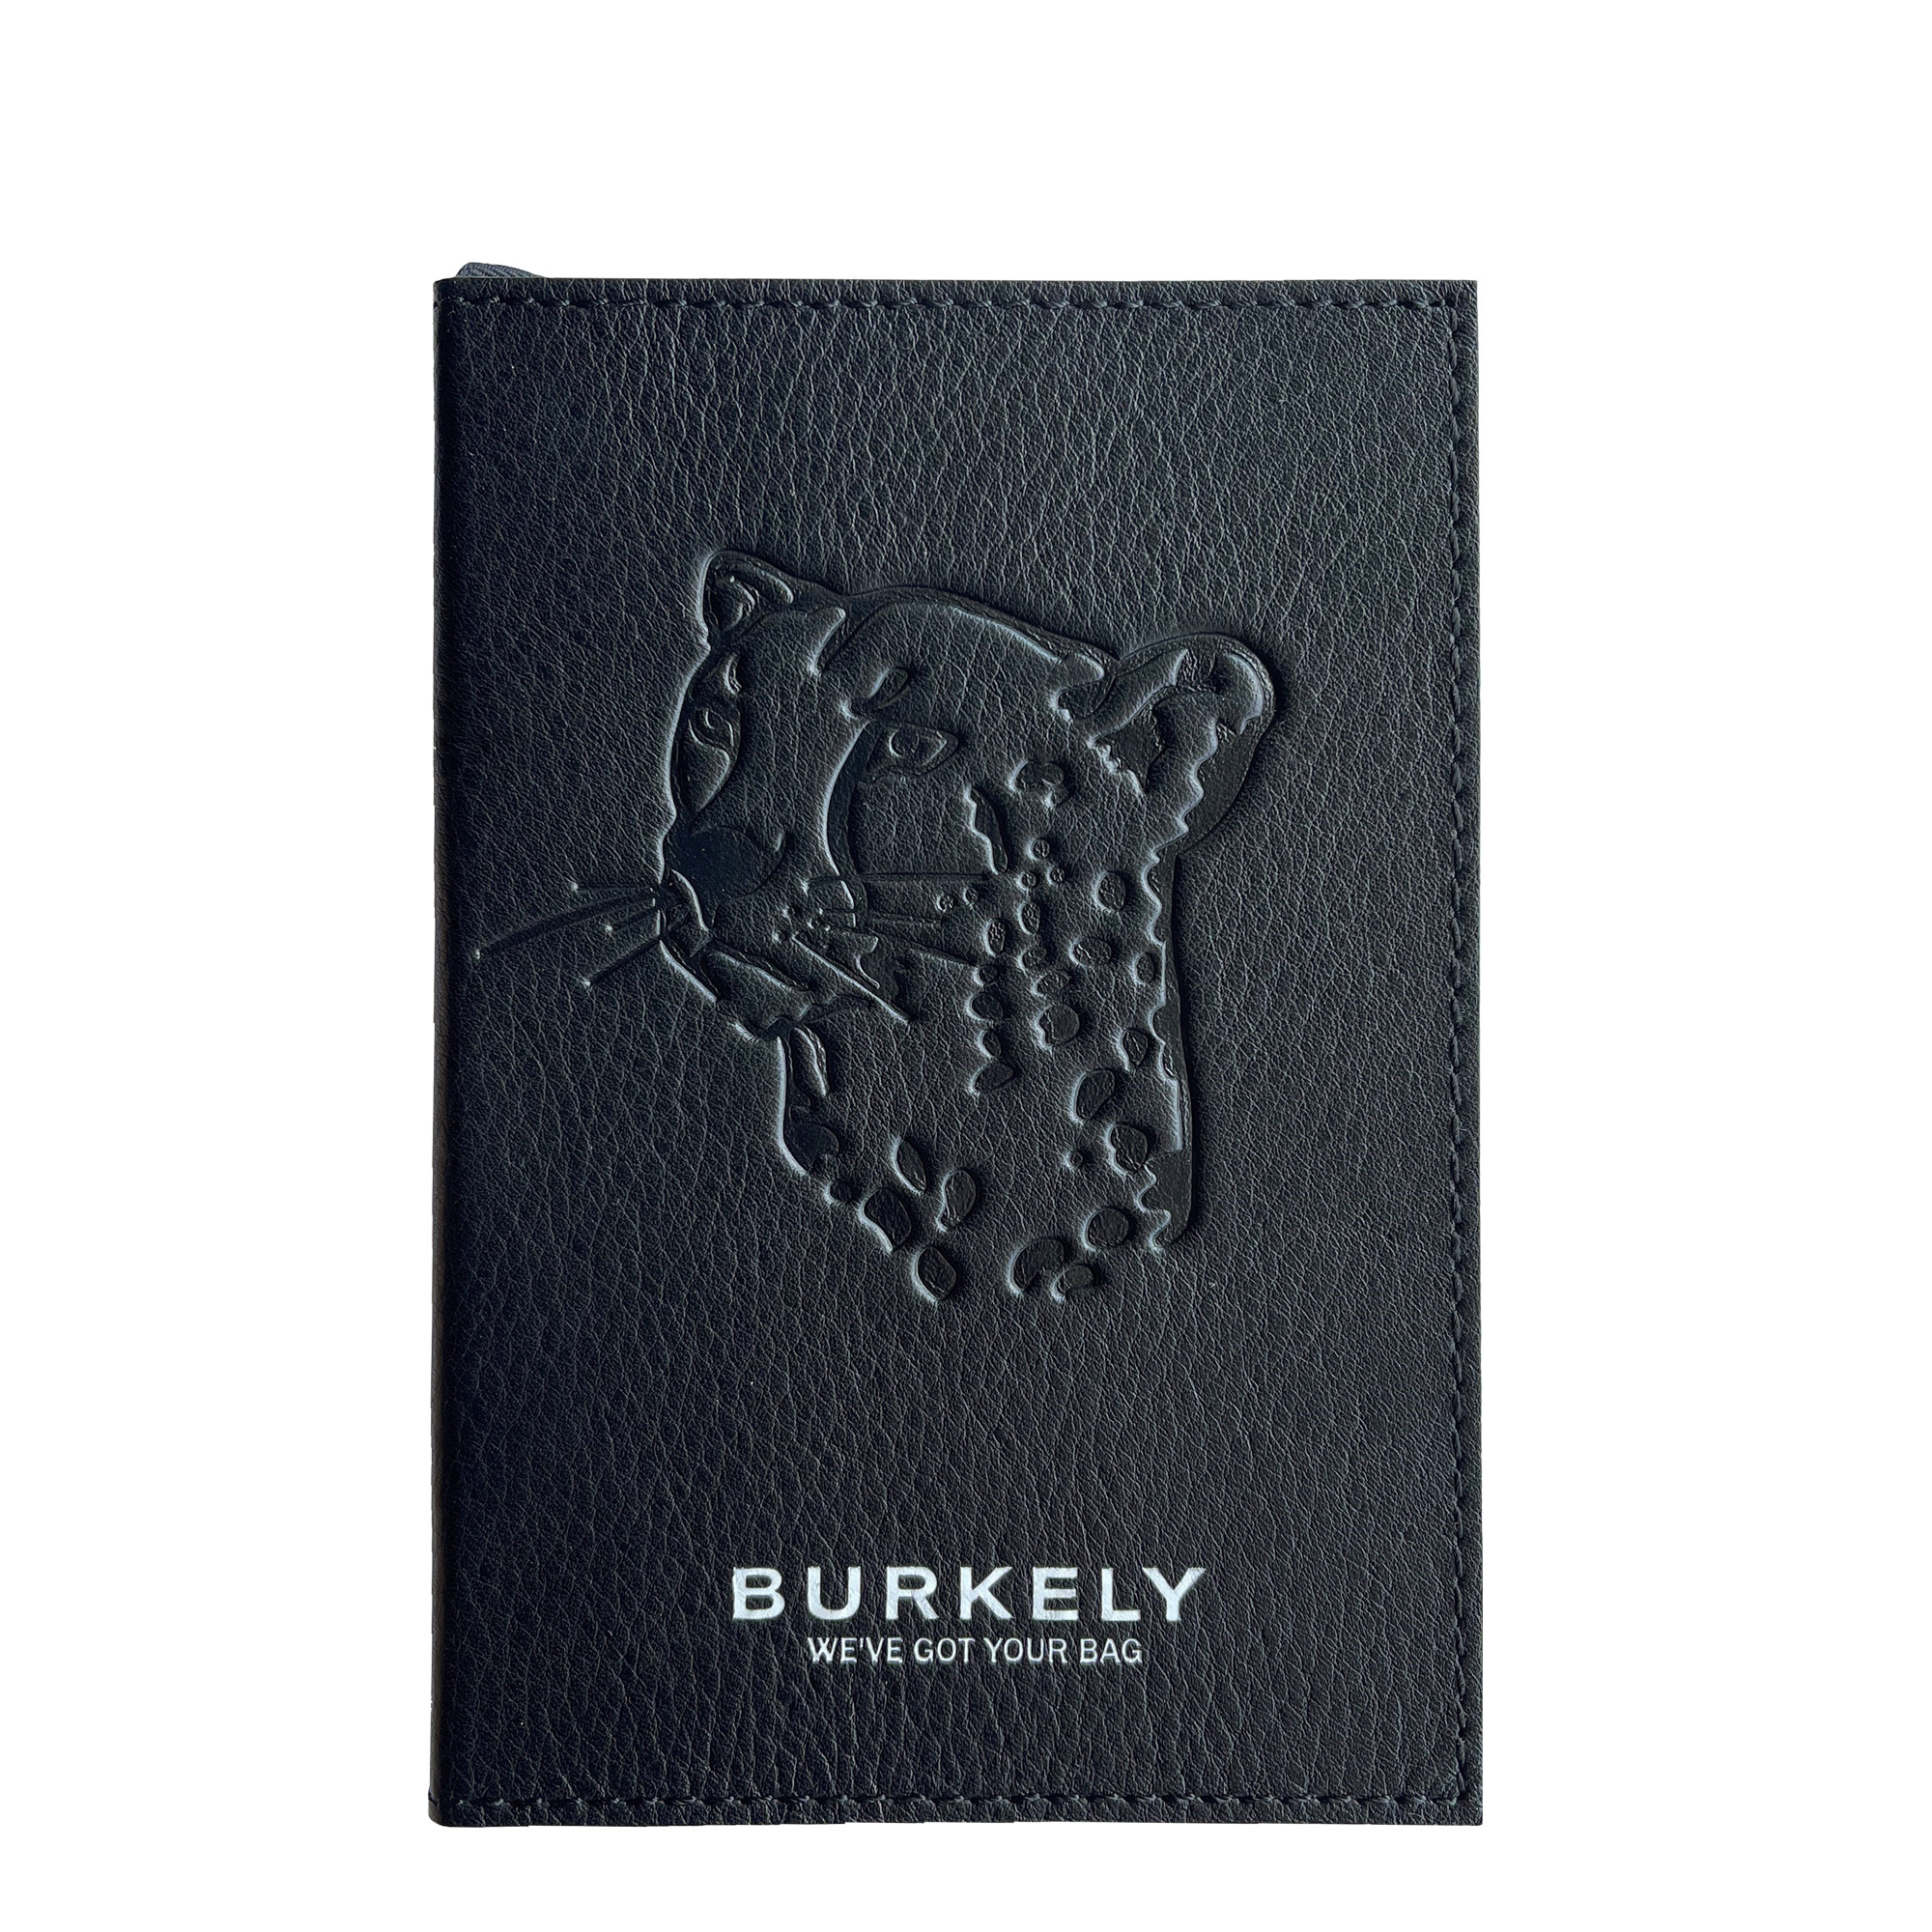 BURKELY Notebook